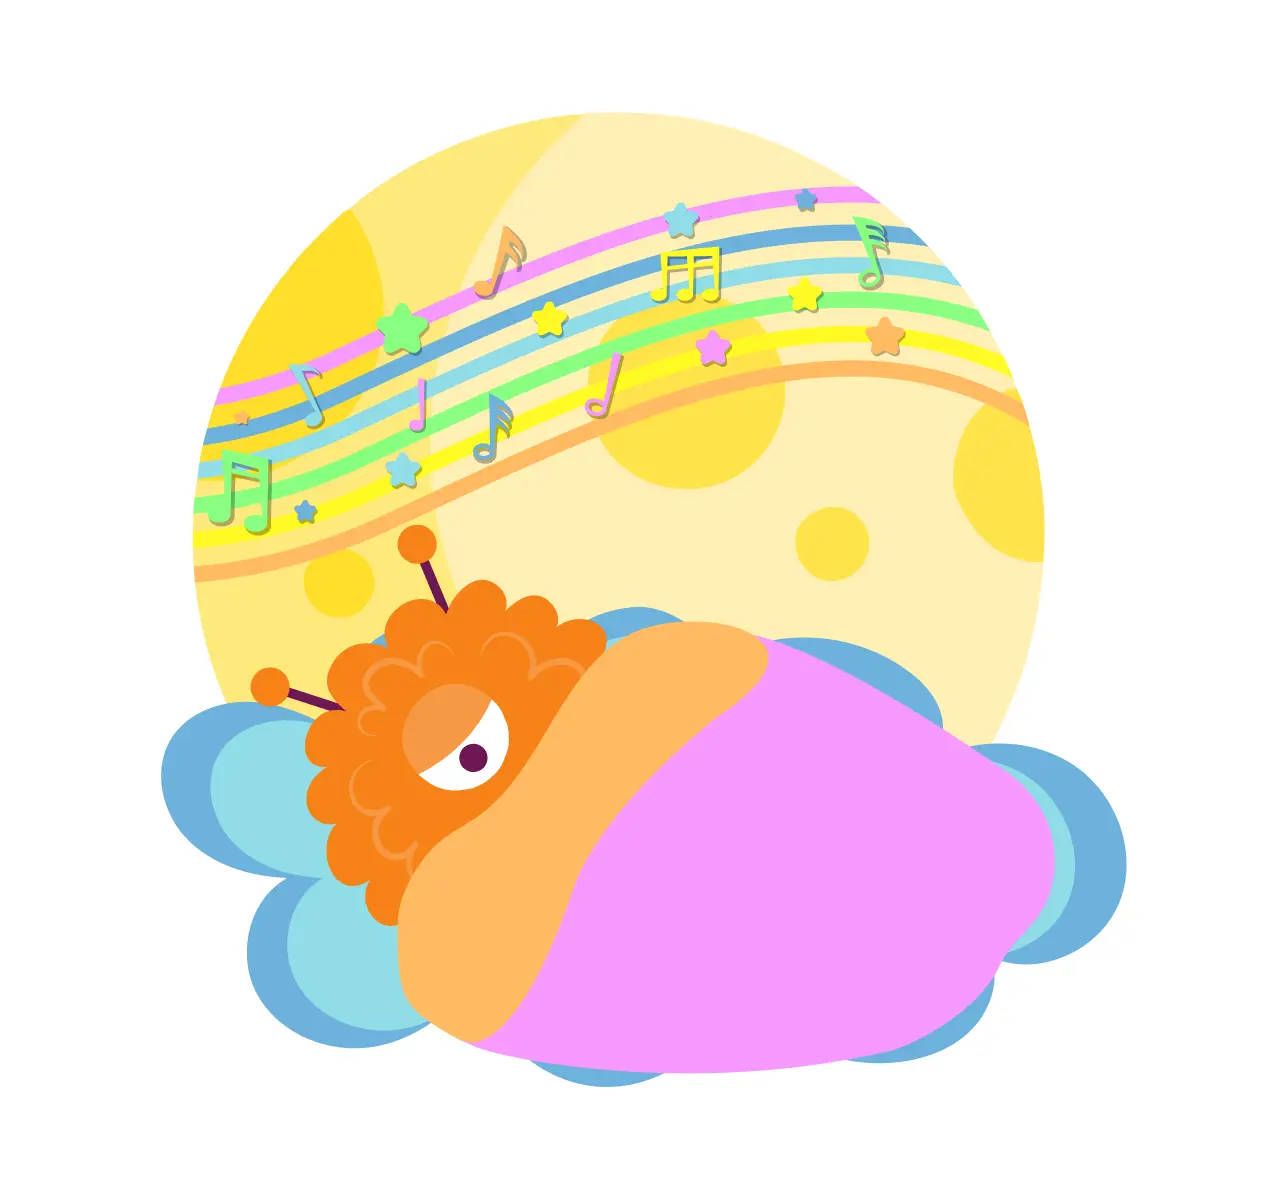 A cute monster sleeping in bed, with sleep music for kids playing in the background